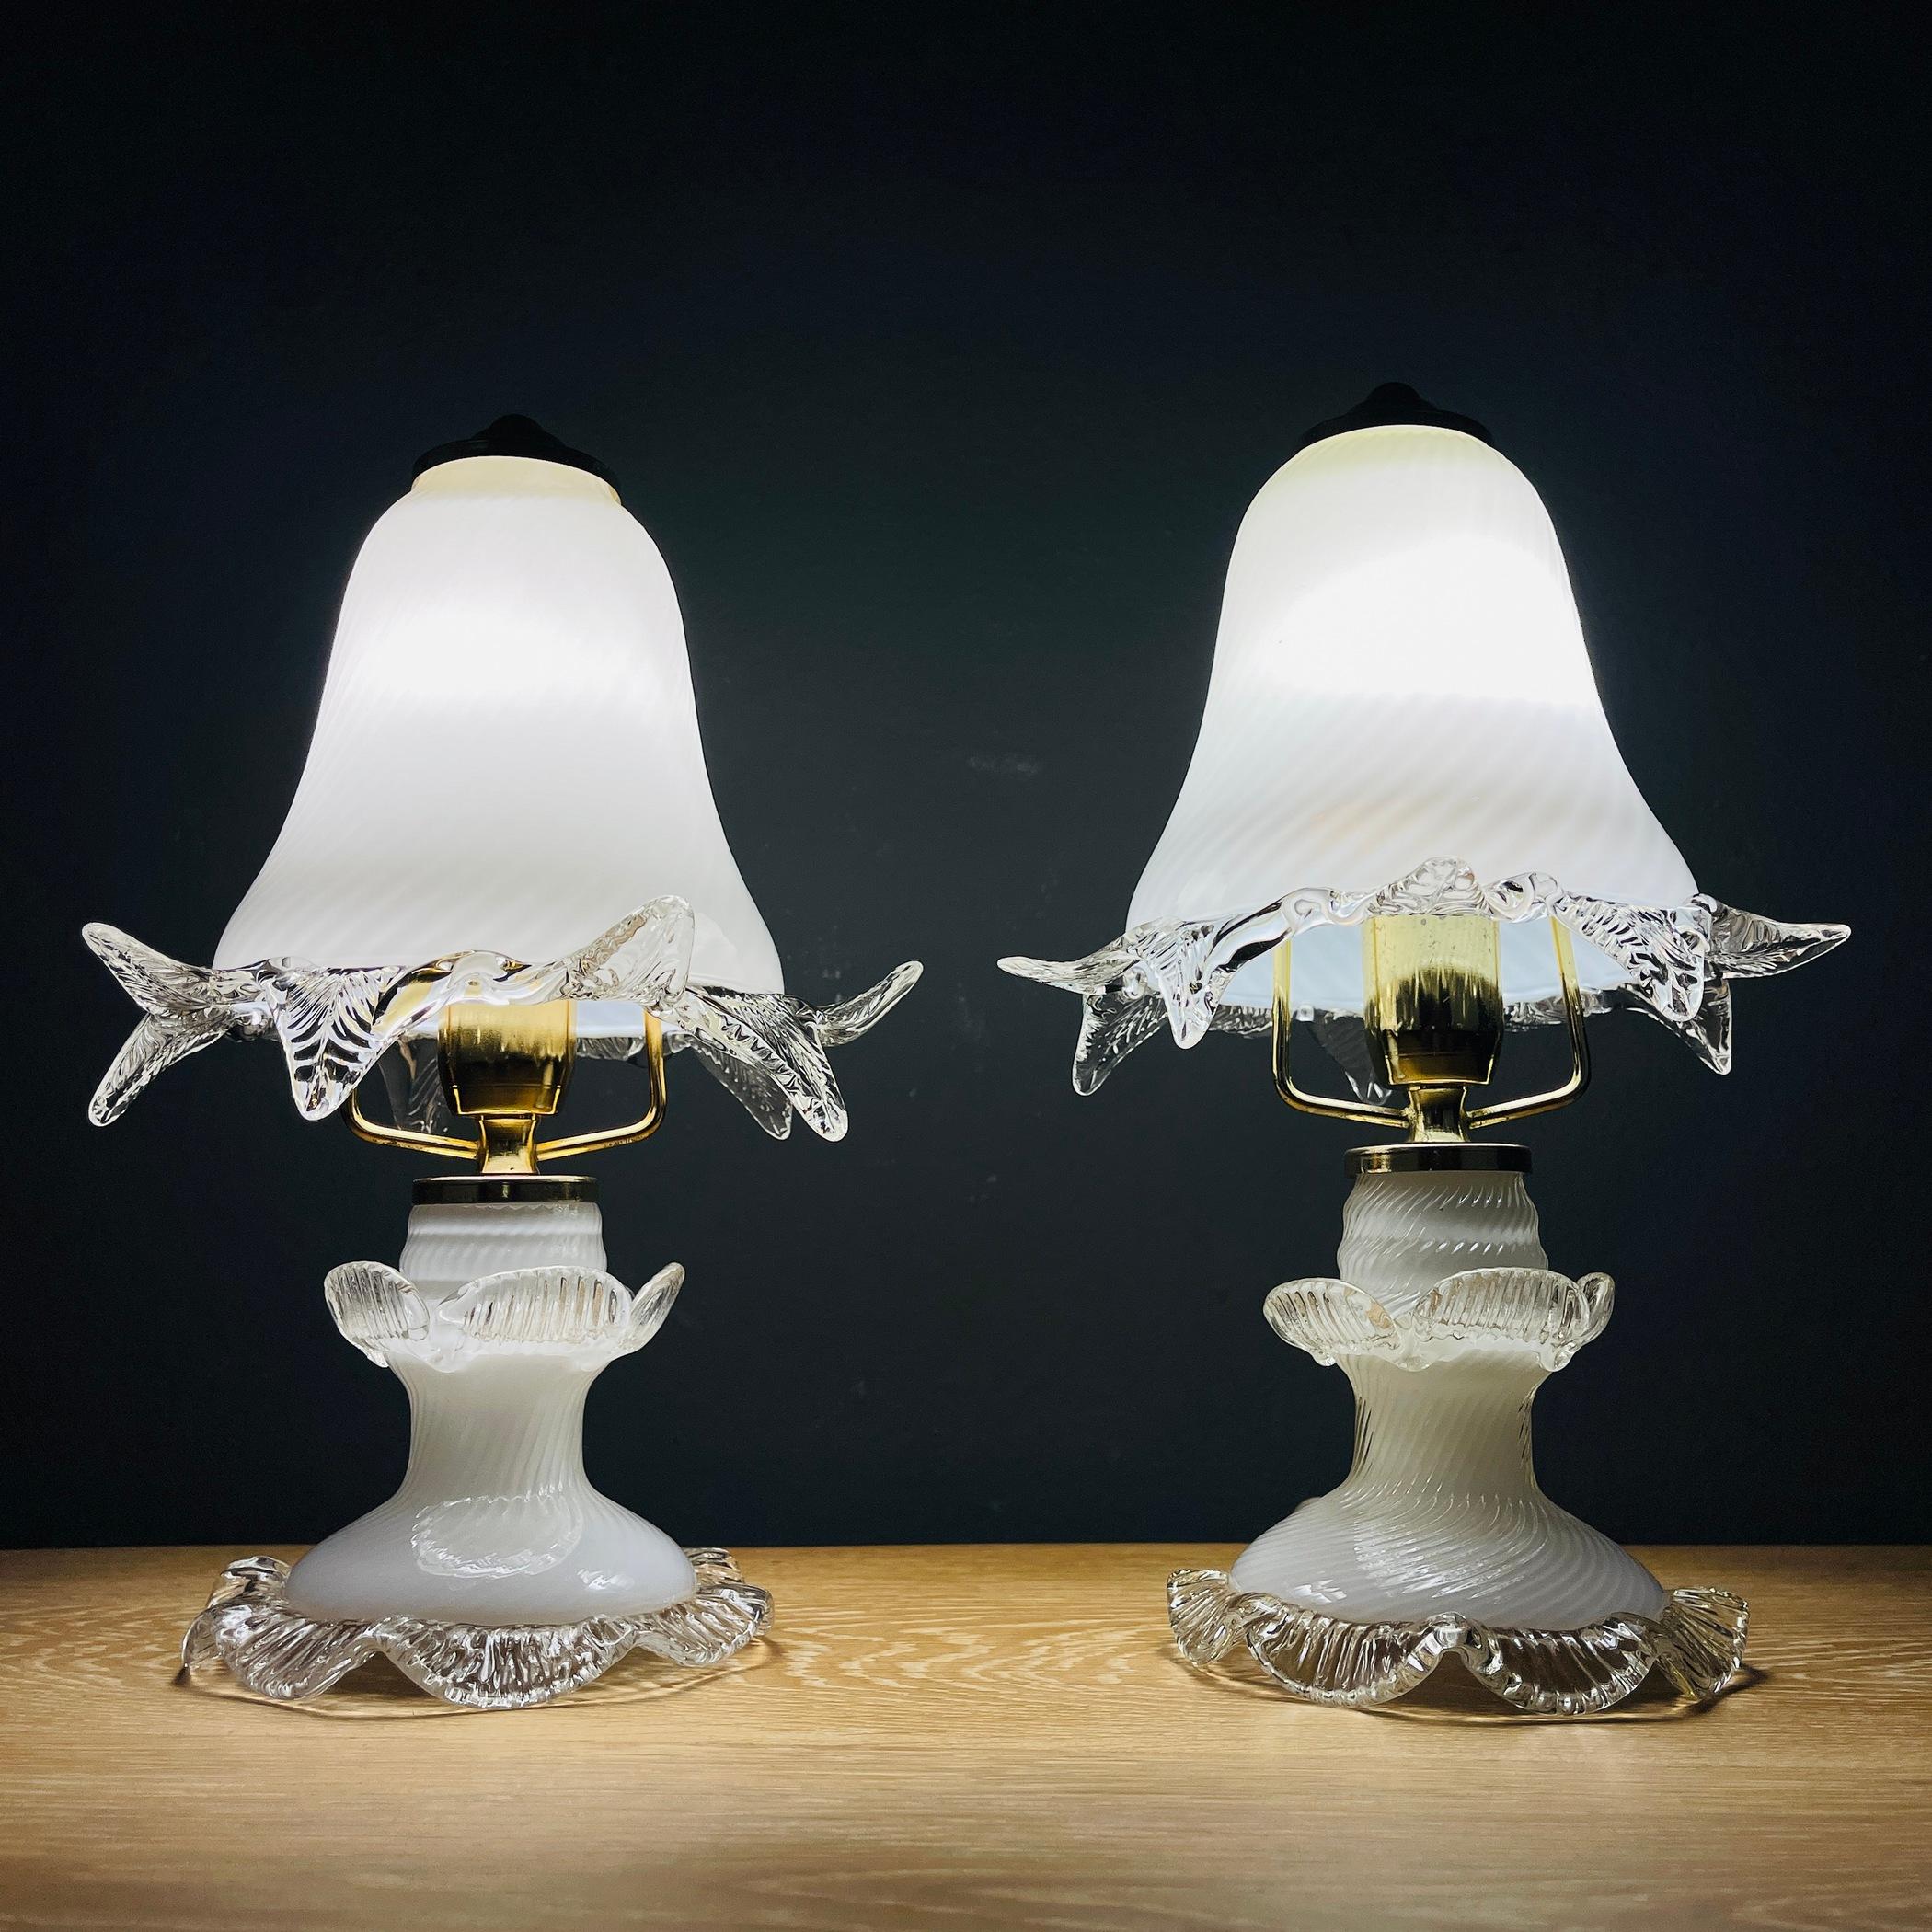 Enchant your home with this exquisite pair of Murano glass night lights, handcrafted in Italy during the 1980s. These captivating pieces are sure to adorn your space with timeless elegance. Rest assured, these night lights are in very good vintage